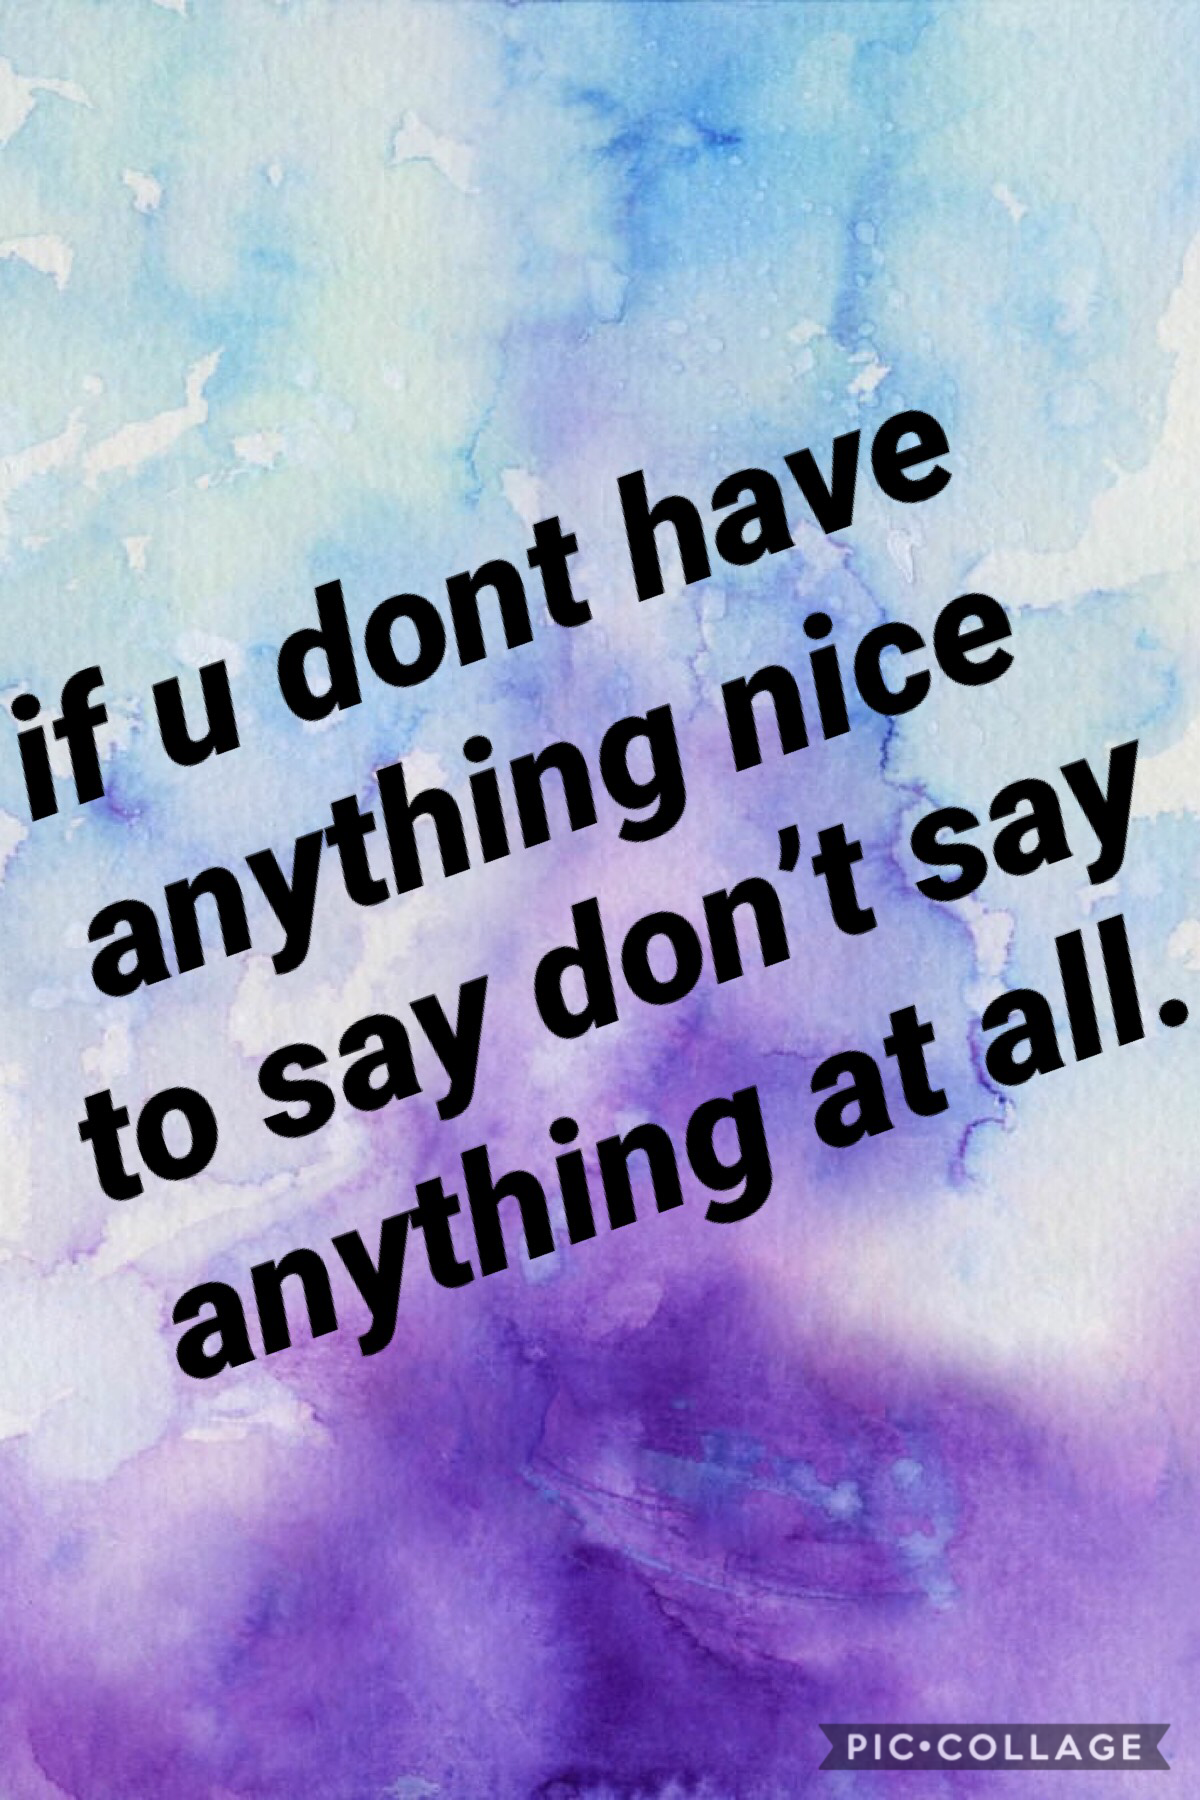 #choosekind
if u dont have nothin nice to say to someone do me and you a favor don’t say anything at all. 
#bullyingiswong